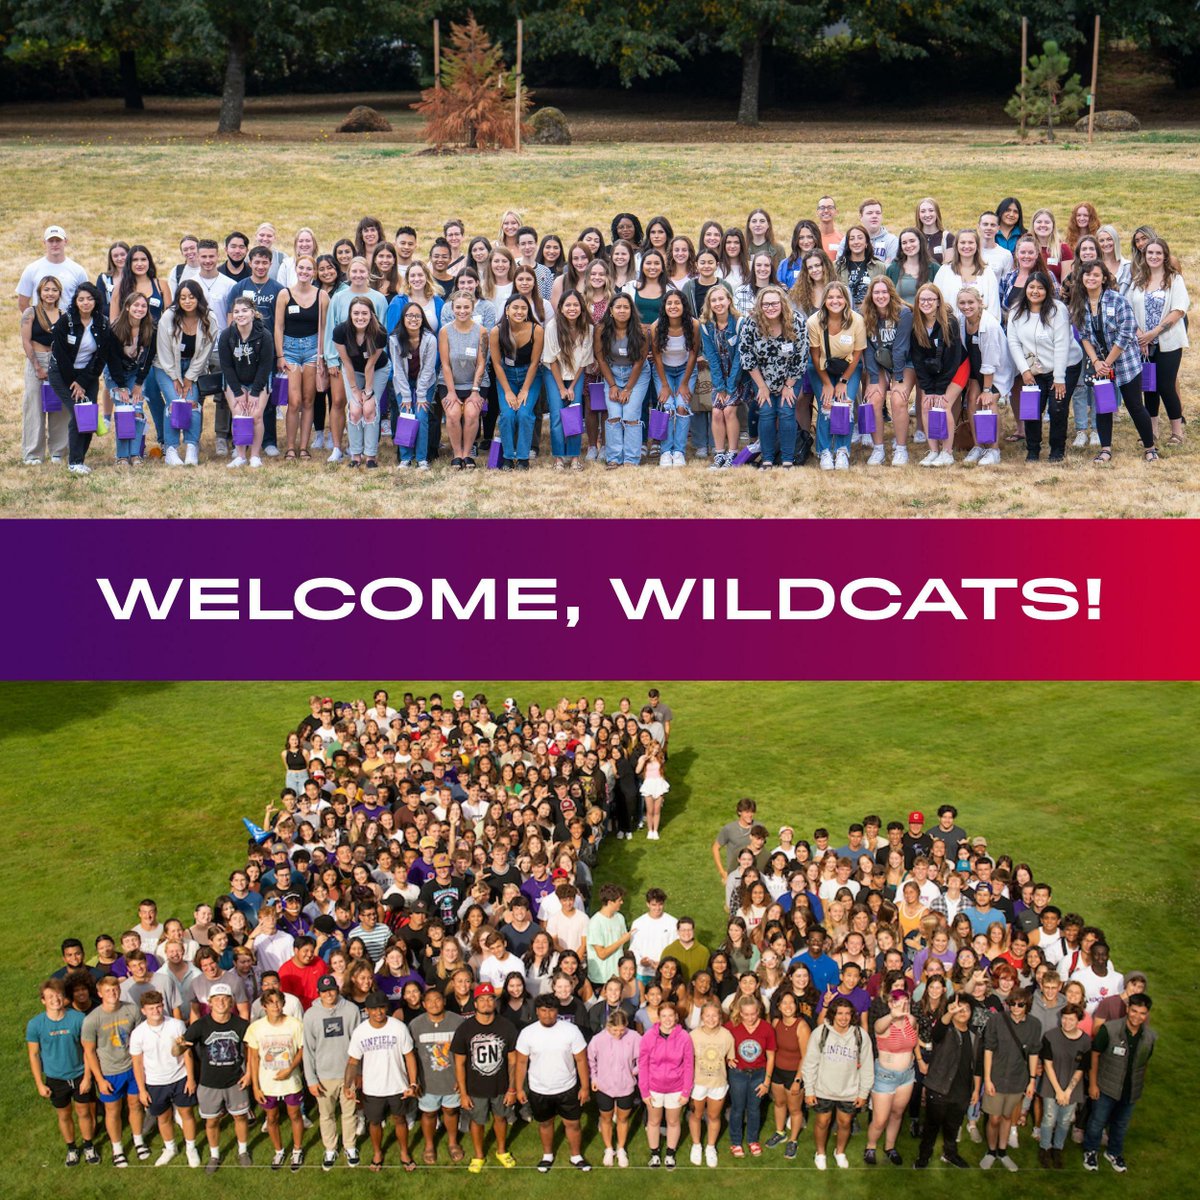 Welcome to all the new Wildcats! 🐾 #UncommonU @linfieldnursing